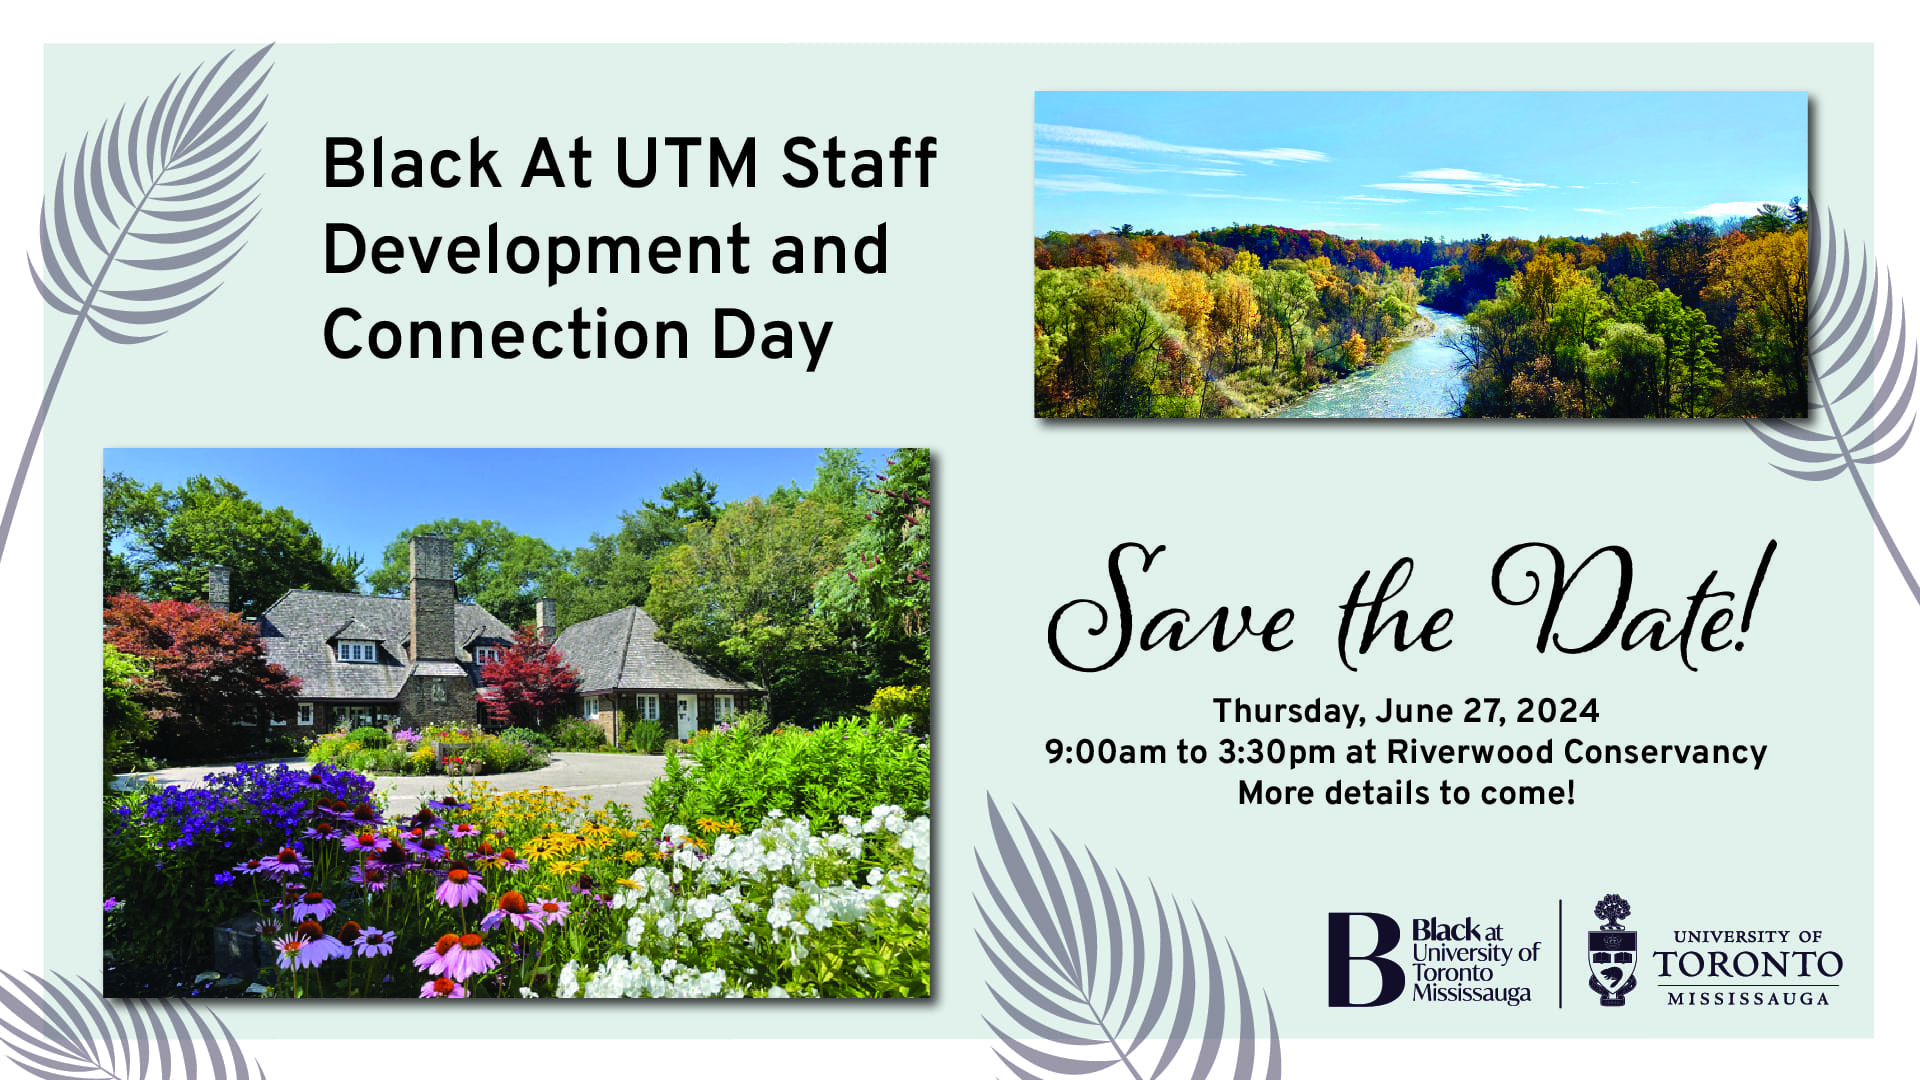 Save the Date flyer for Staff Retreat